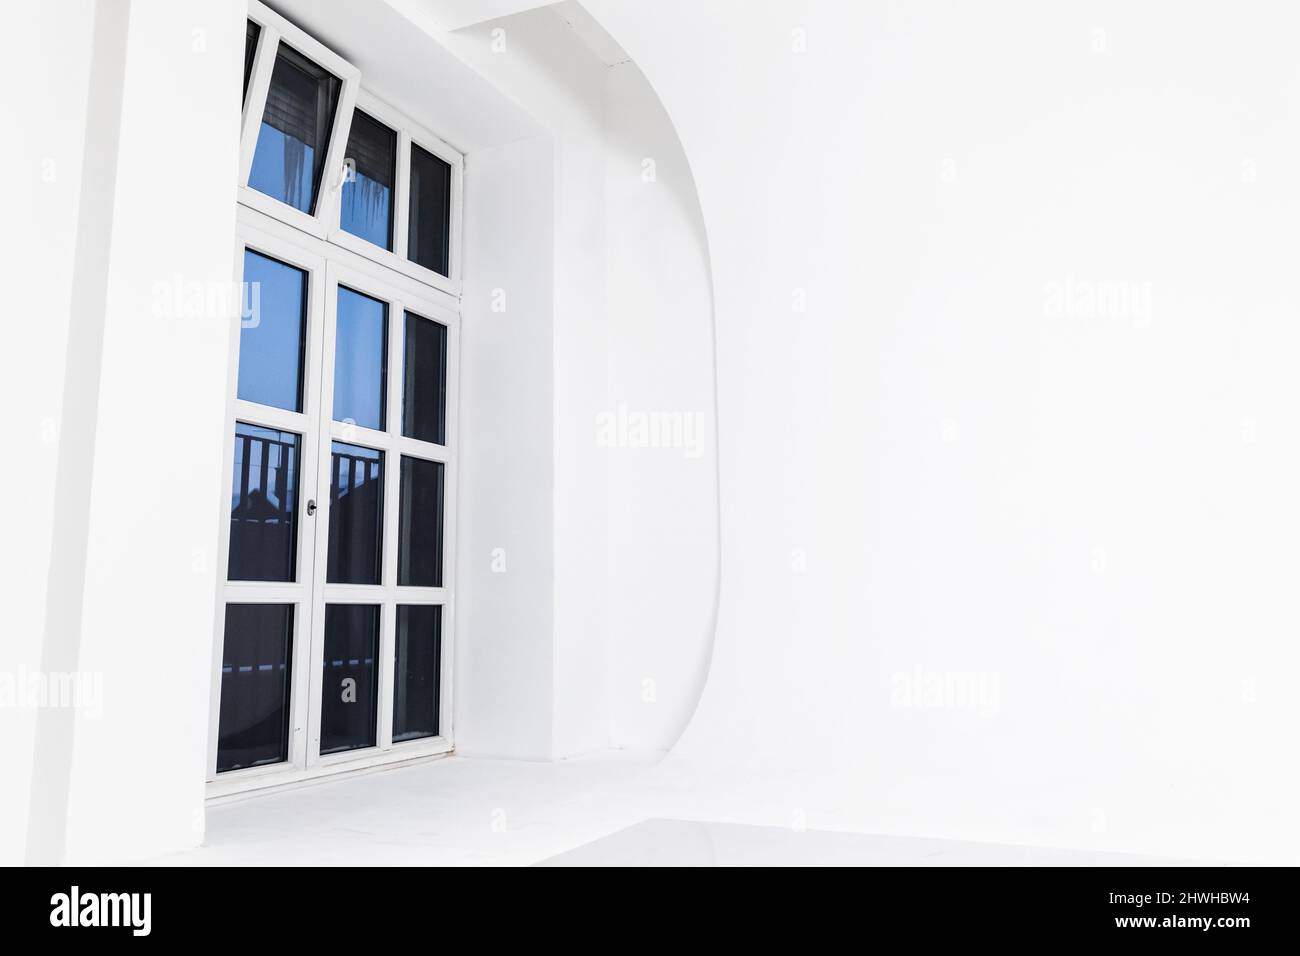 Abstract white studio interior background, empty blank cyclorama structure and window in white frame Stock Photo